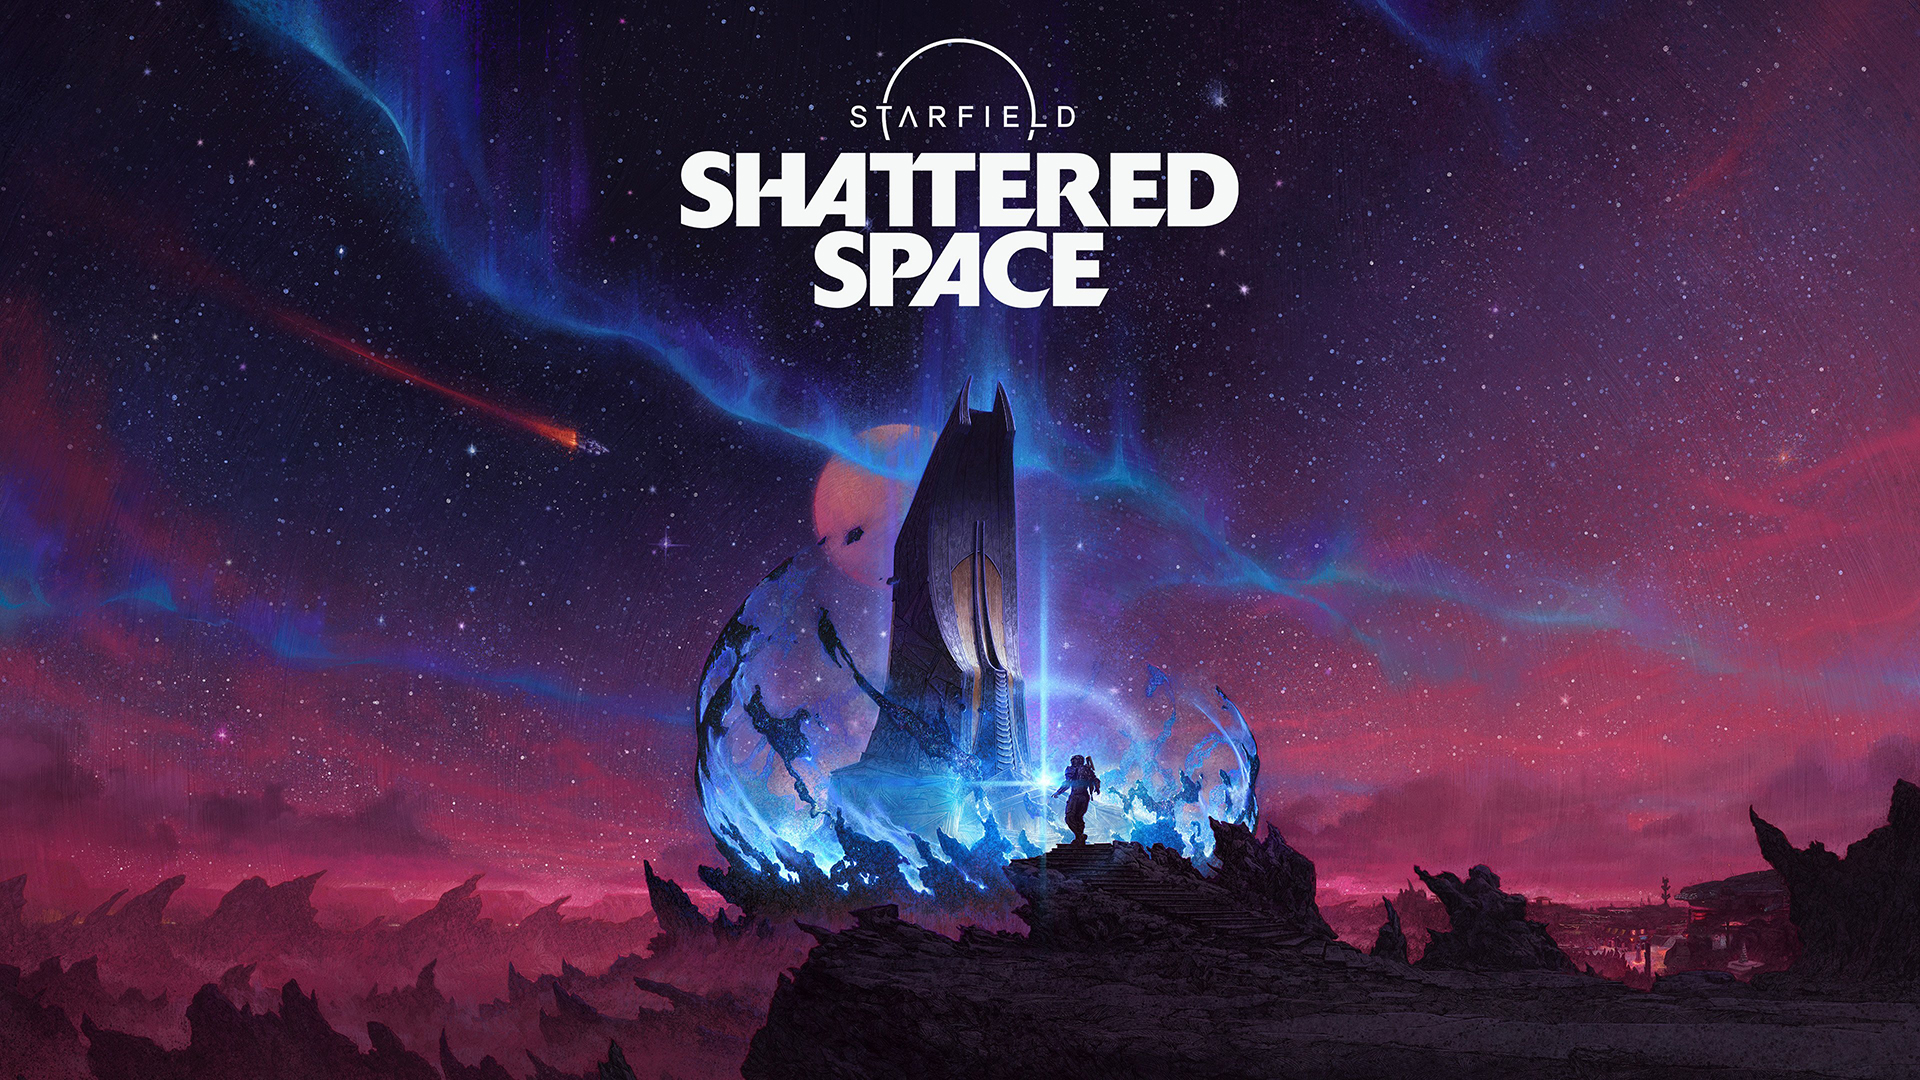 ‘Starfield’ unveils 1st look at ‘Shattered Space’ expansion (video) Space